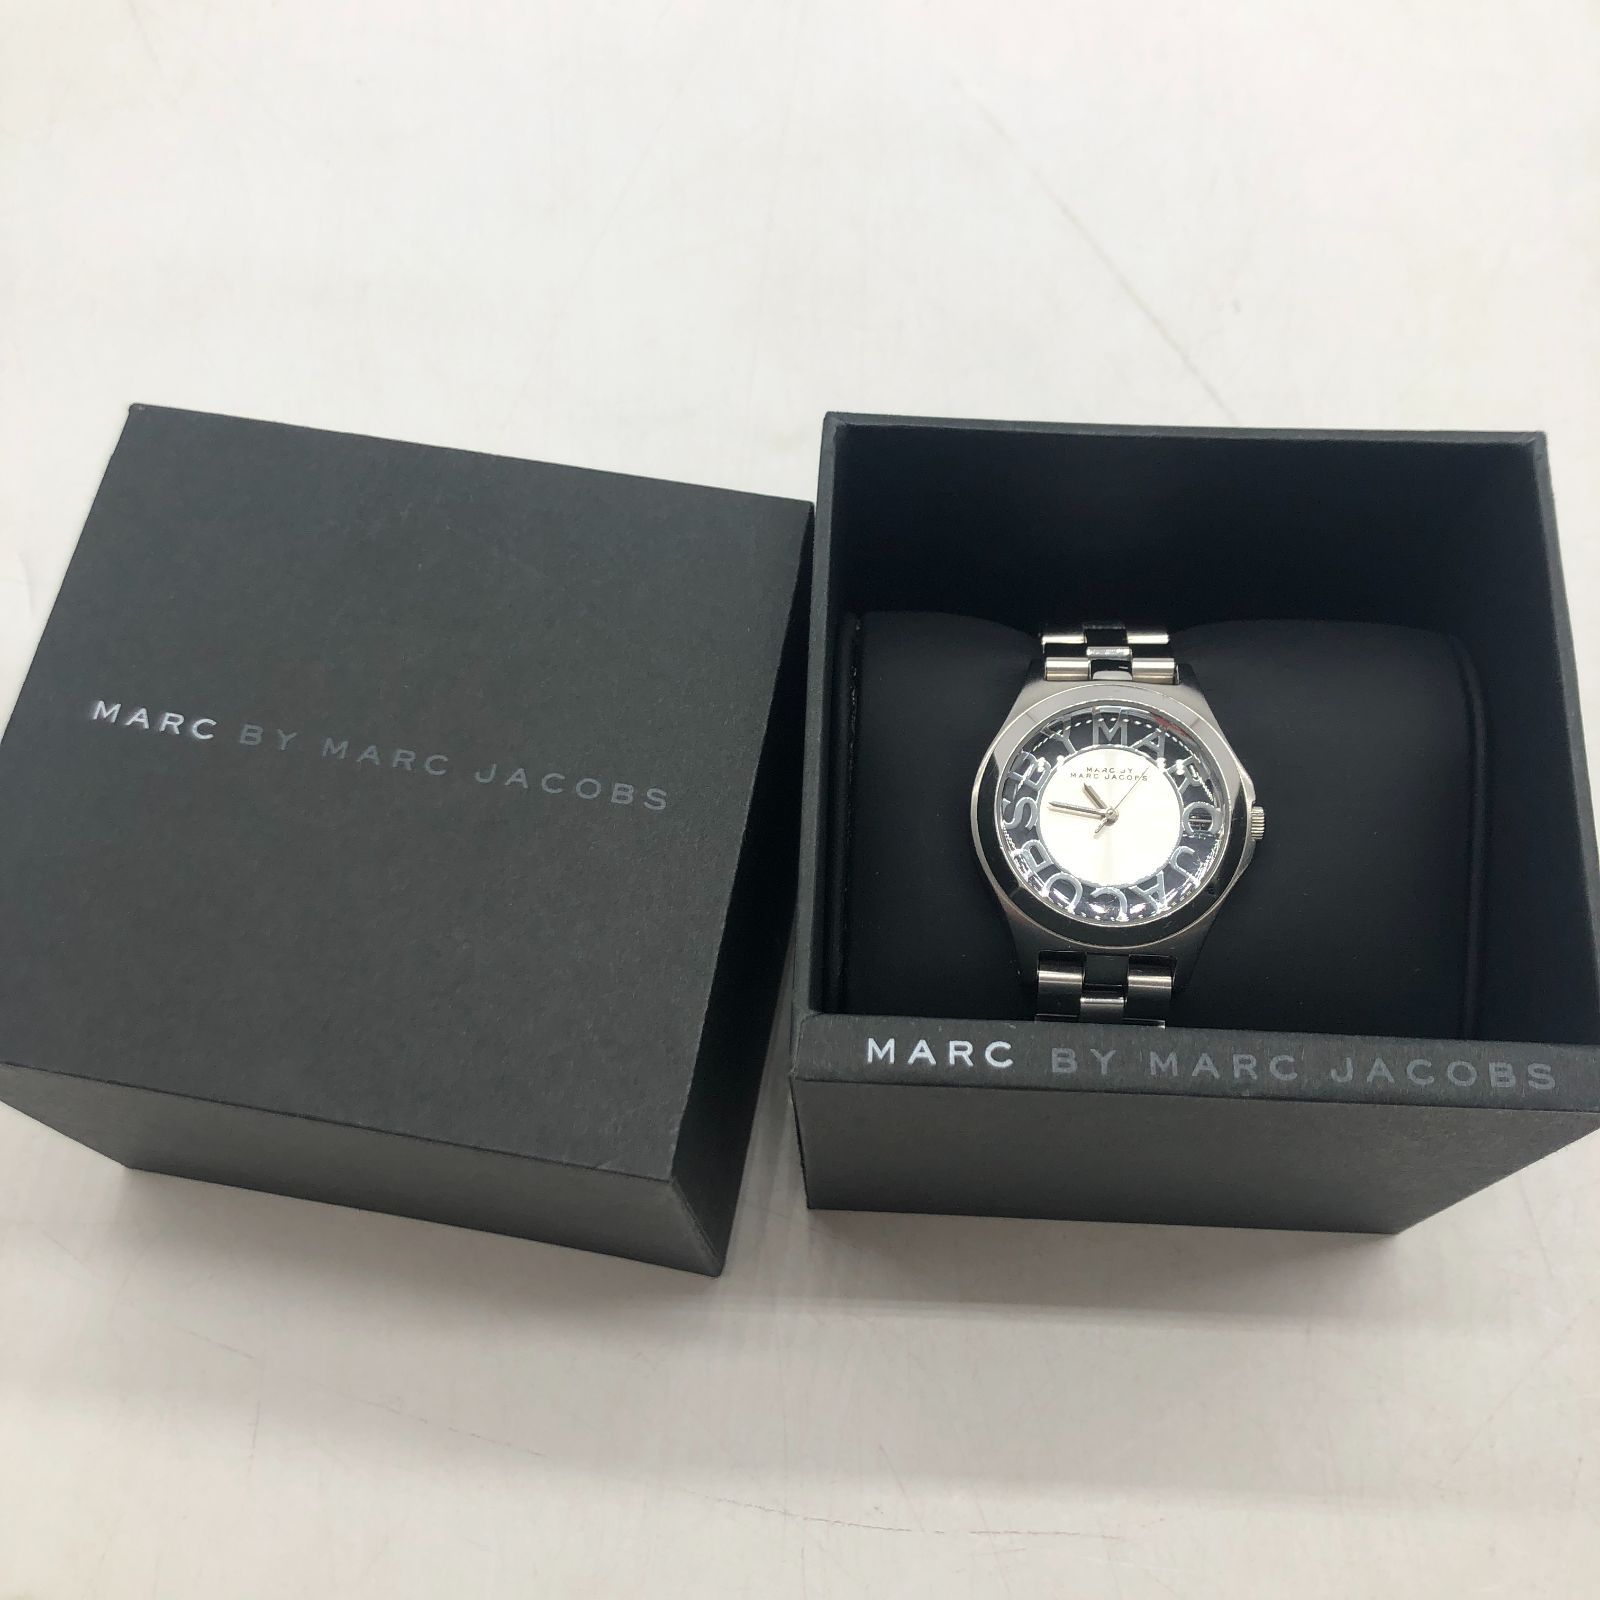 04m0343 MARC BY MARC JACOBS マークバイマークジェイコブス